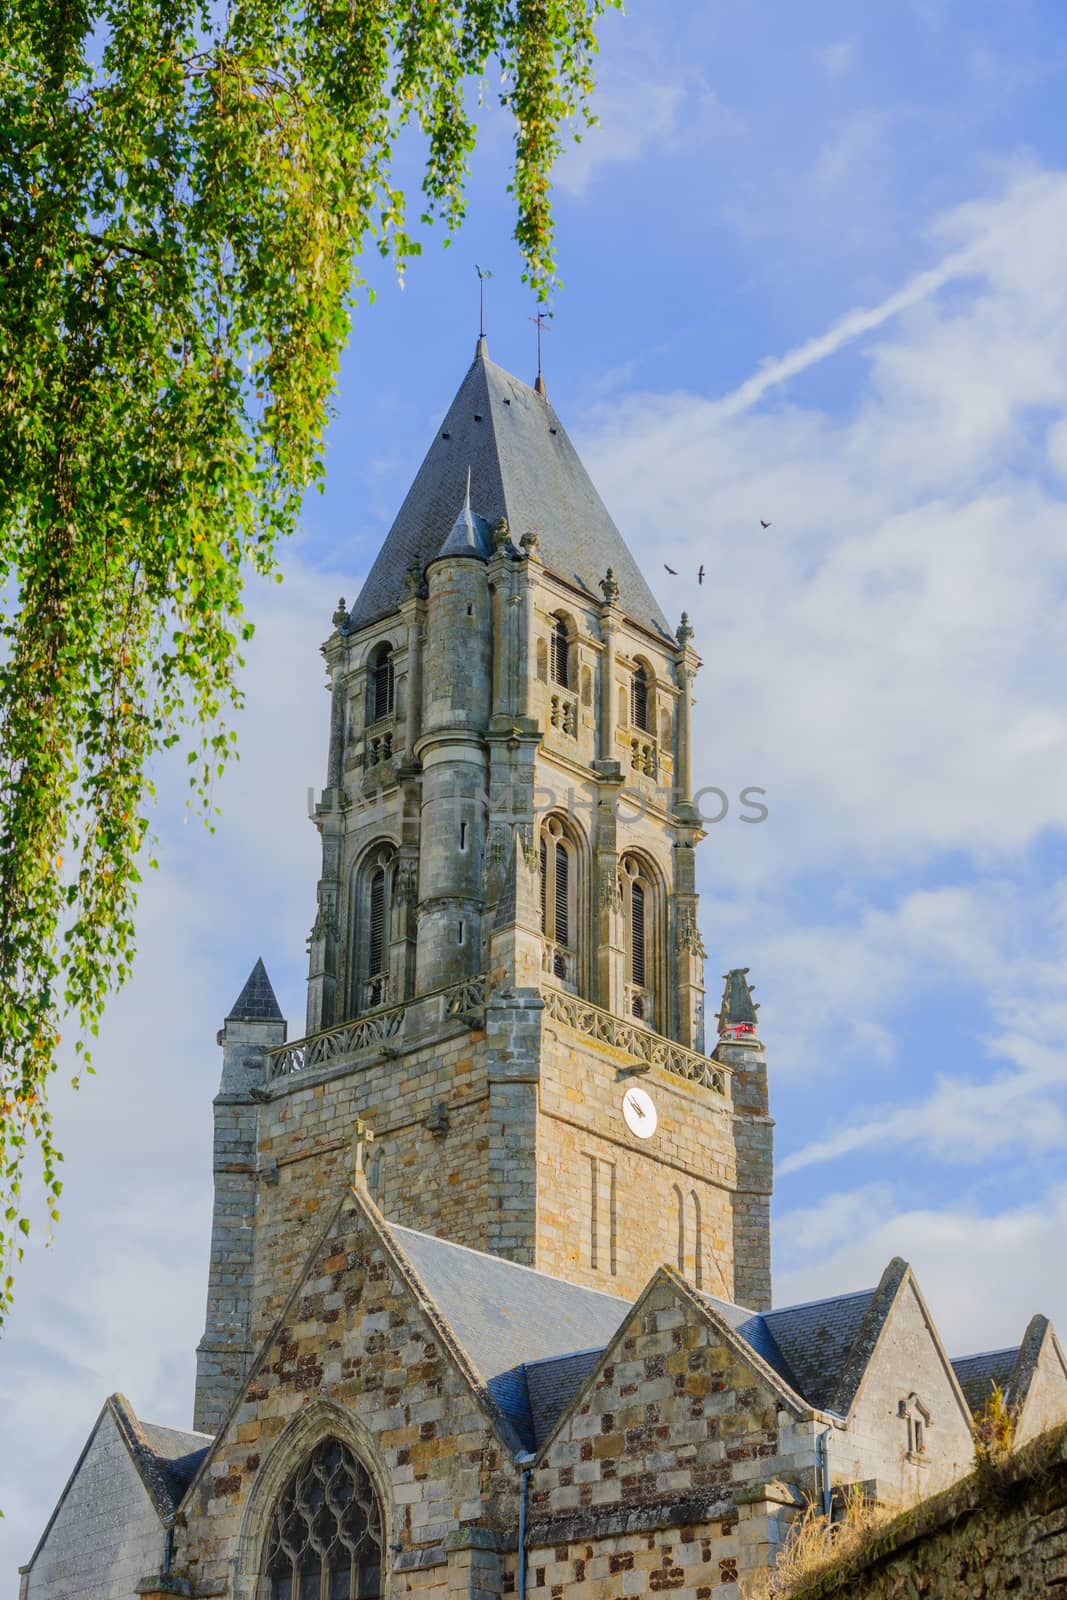 View of the church tower in the village Orbec, in the Calvados department in the Normandy region in northwestern France